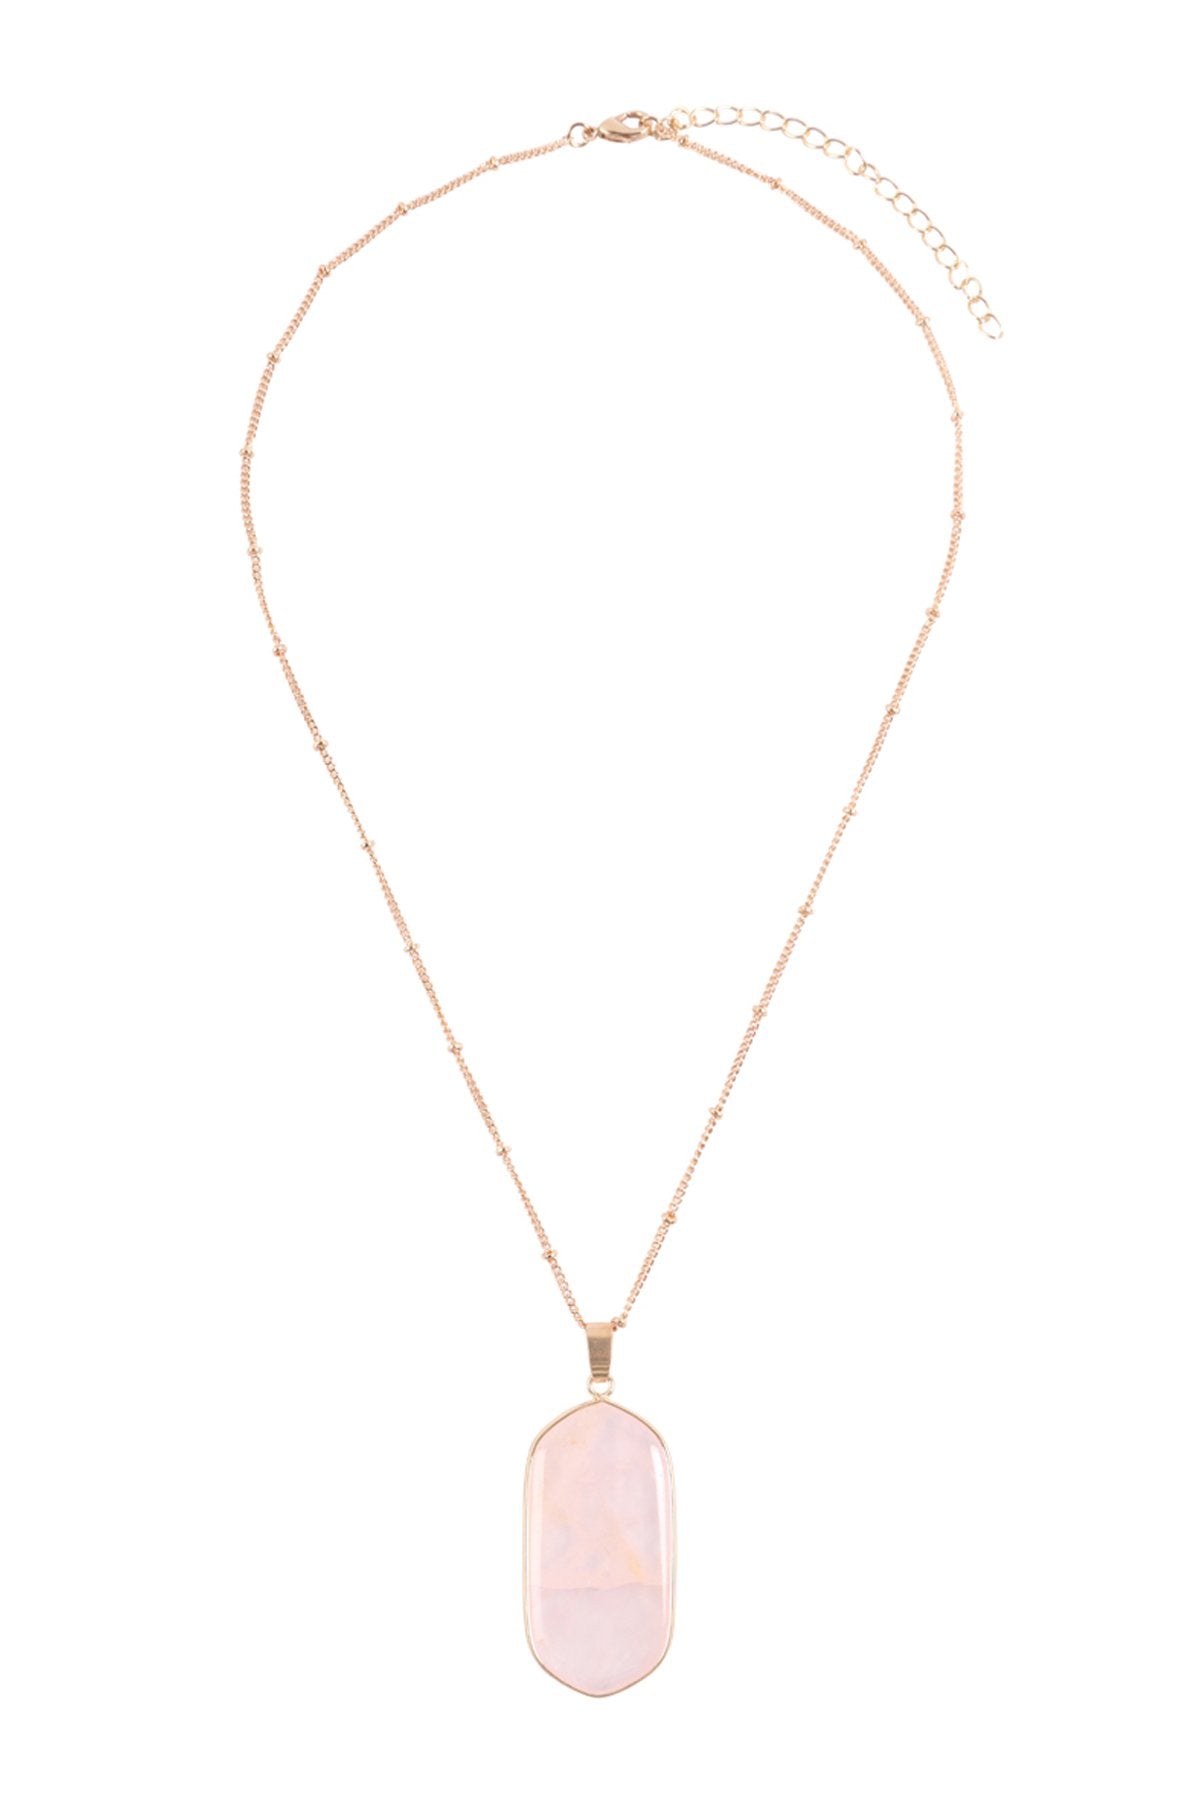 Hdn3184 - Stone Pendant Charm Necklace - LOLA LUXE